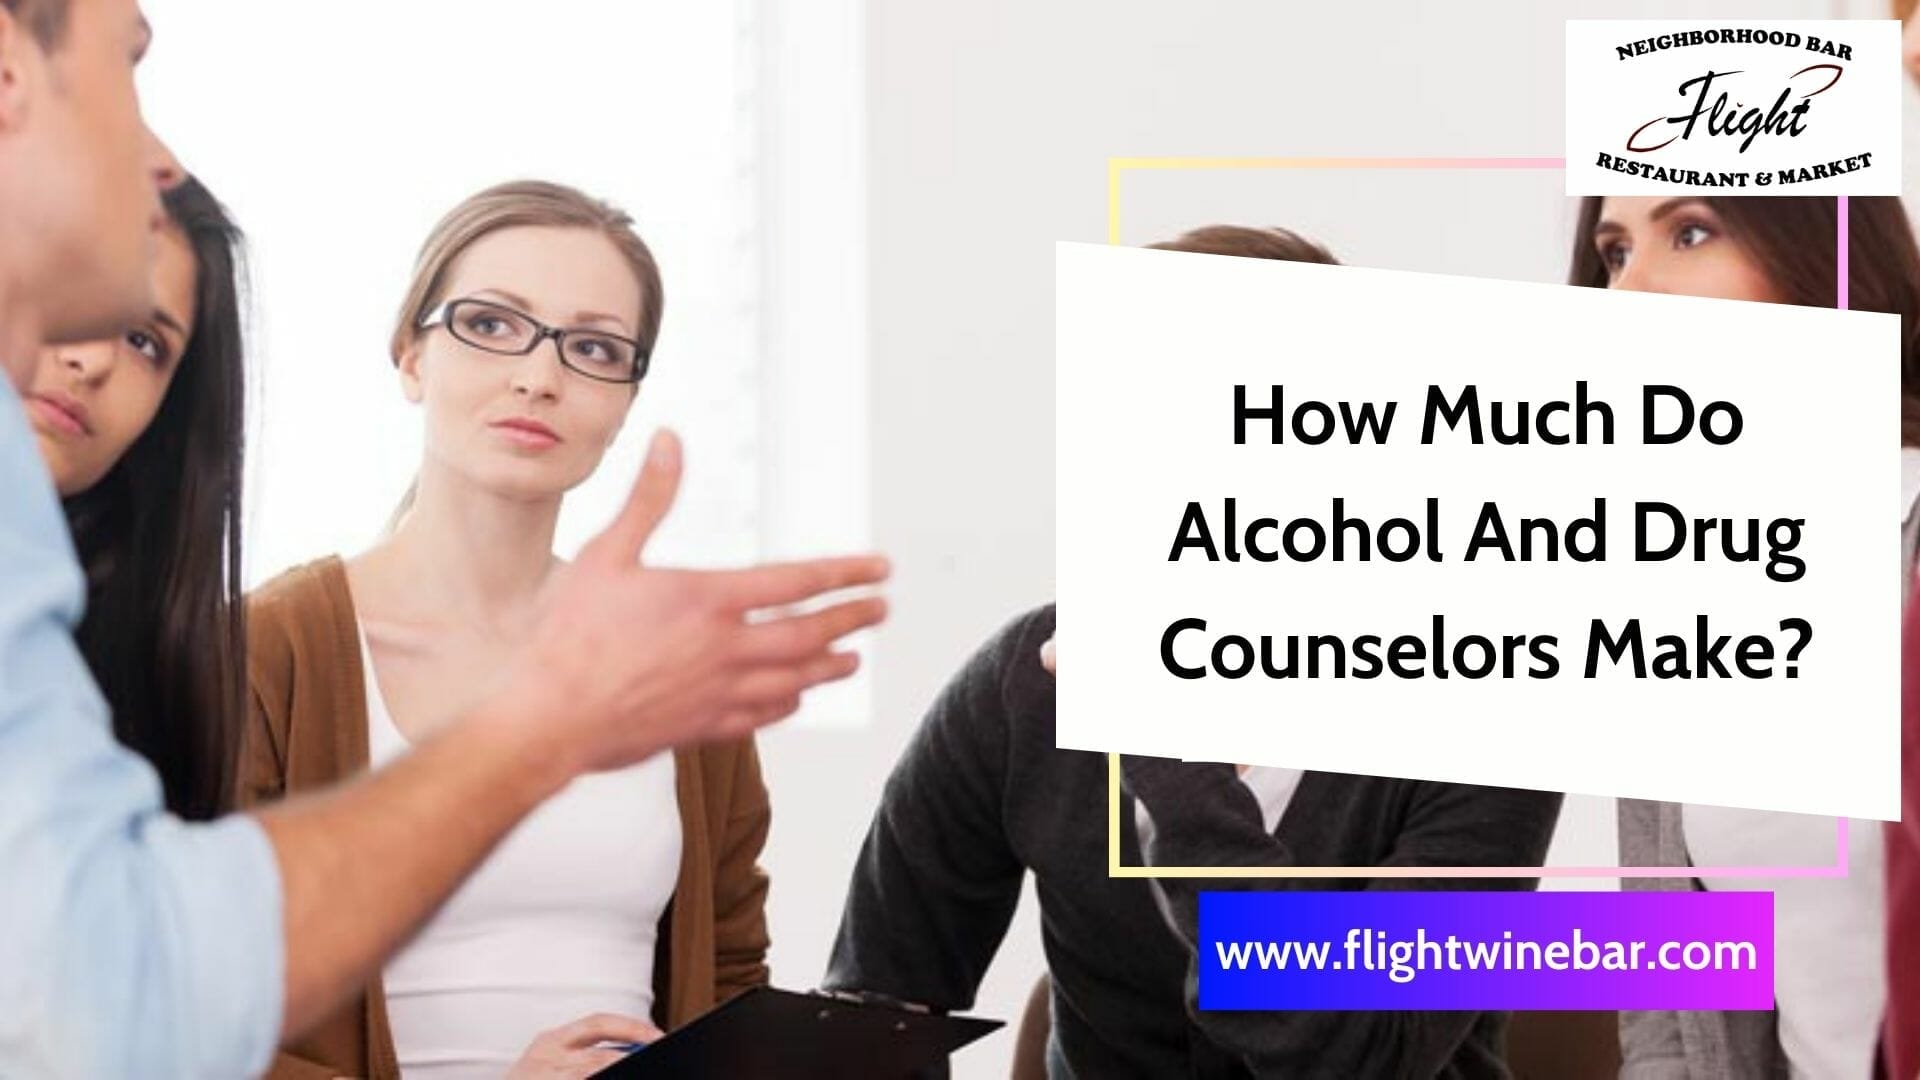 How Much Do Alcohol And Drug Counselors Make